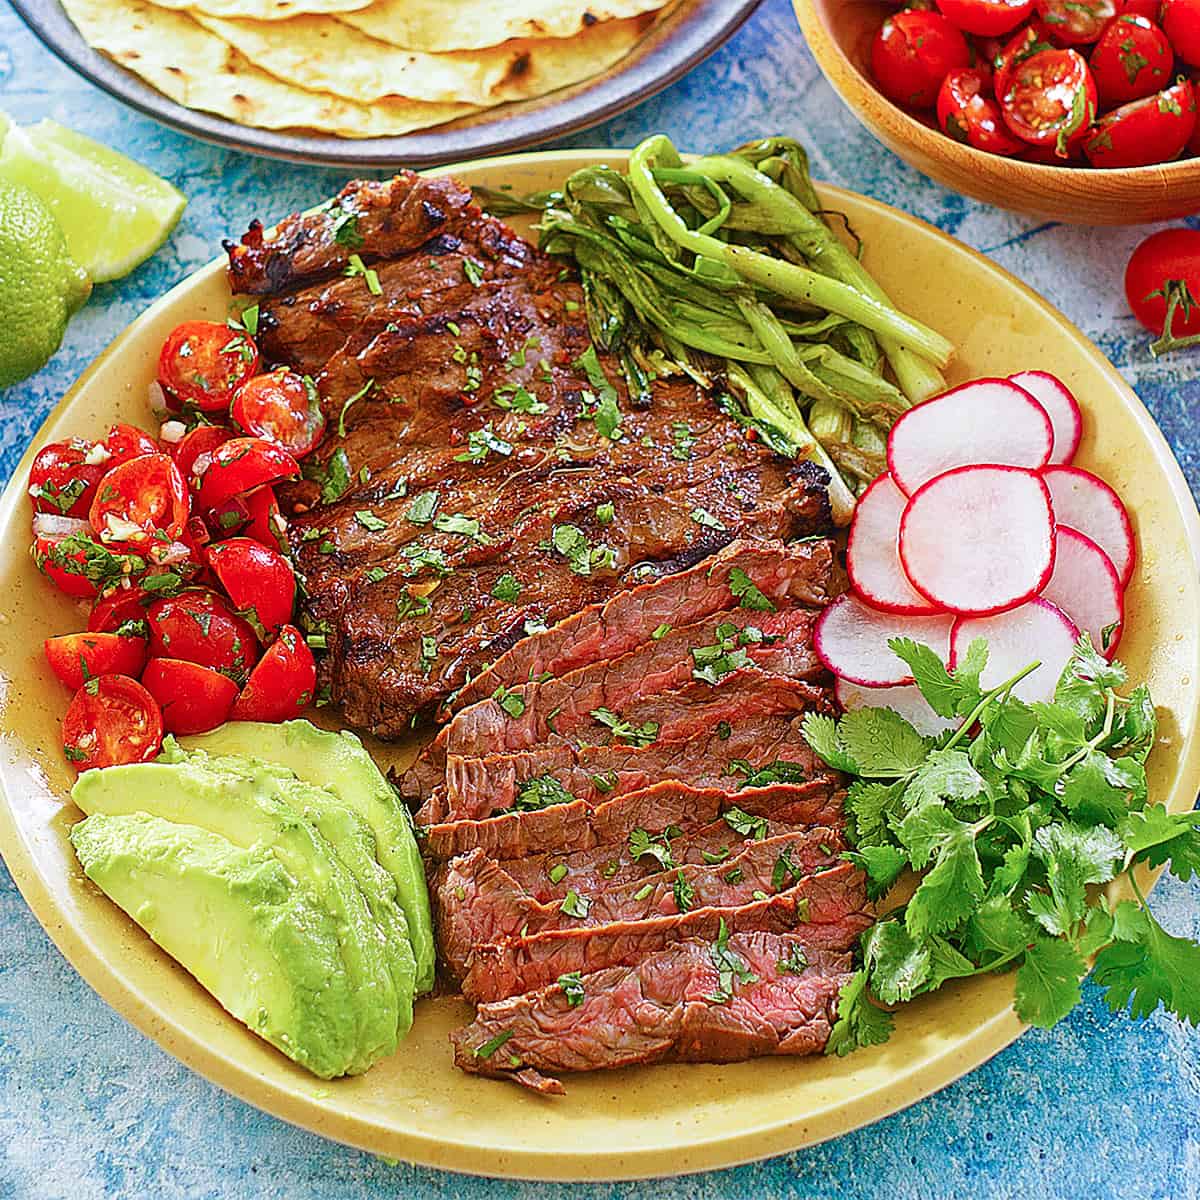 Sliced carne asada taco meat on a plate with vegetables